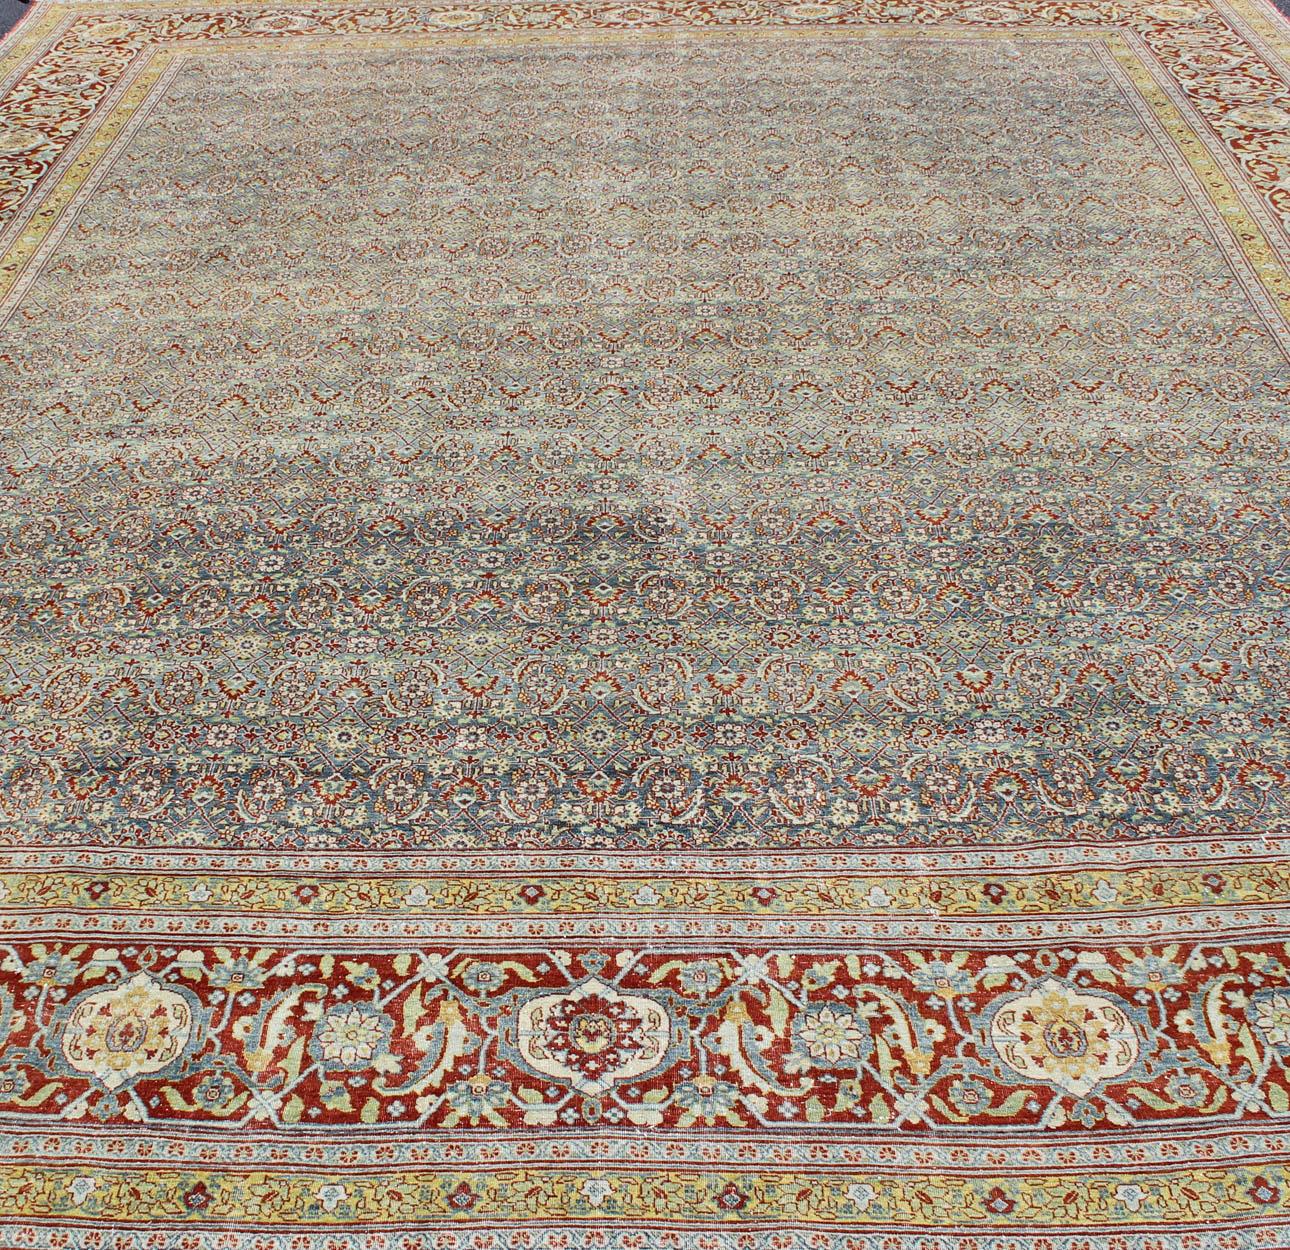 Large All-Over Geometric Antique Persian Tabriz Rug in Blue, Gray, and Red Tones For Sale 7